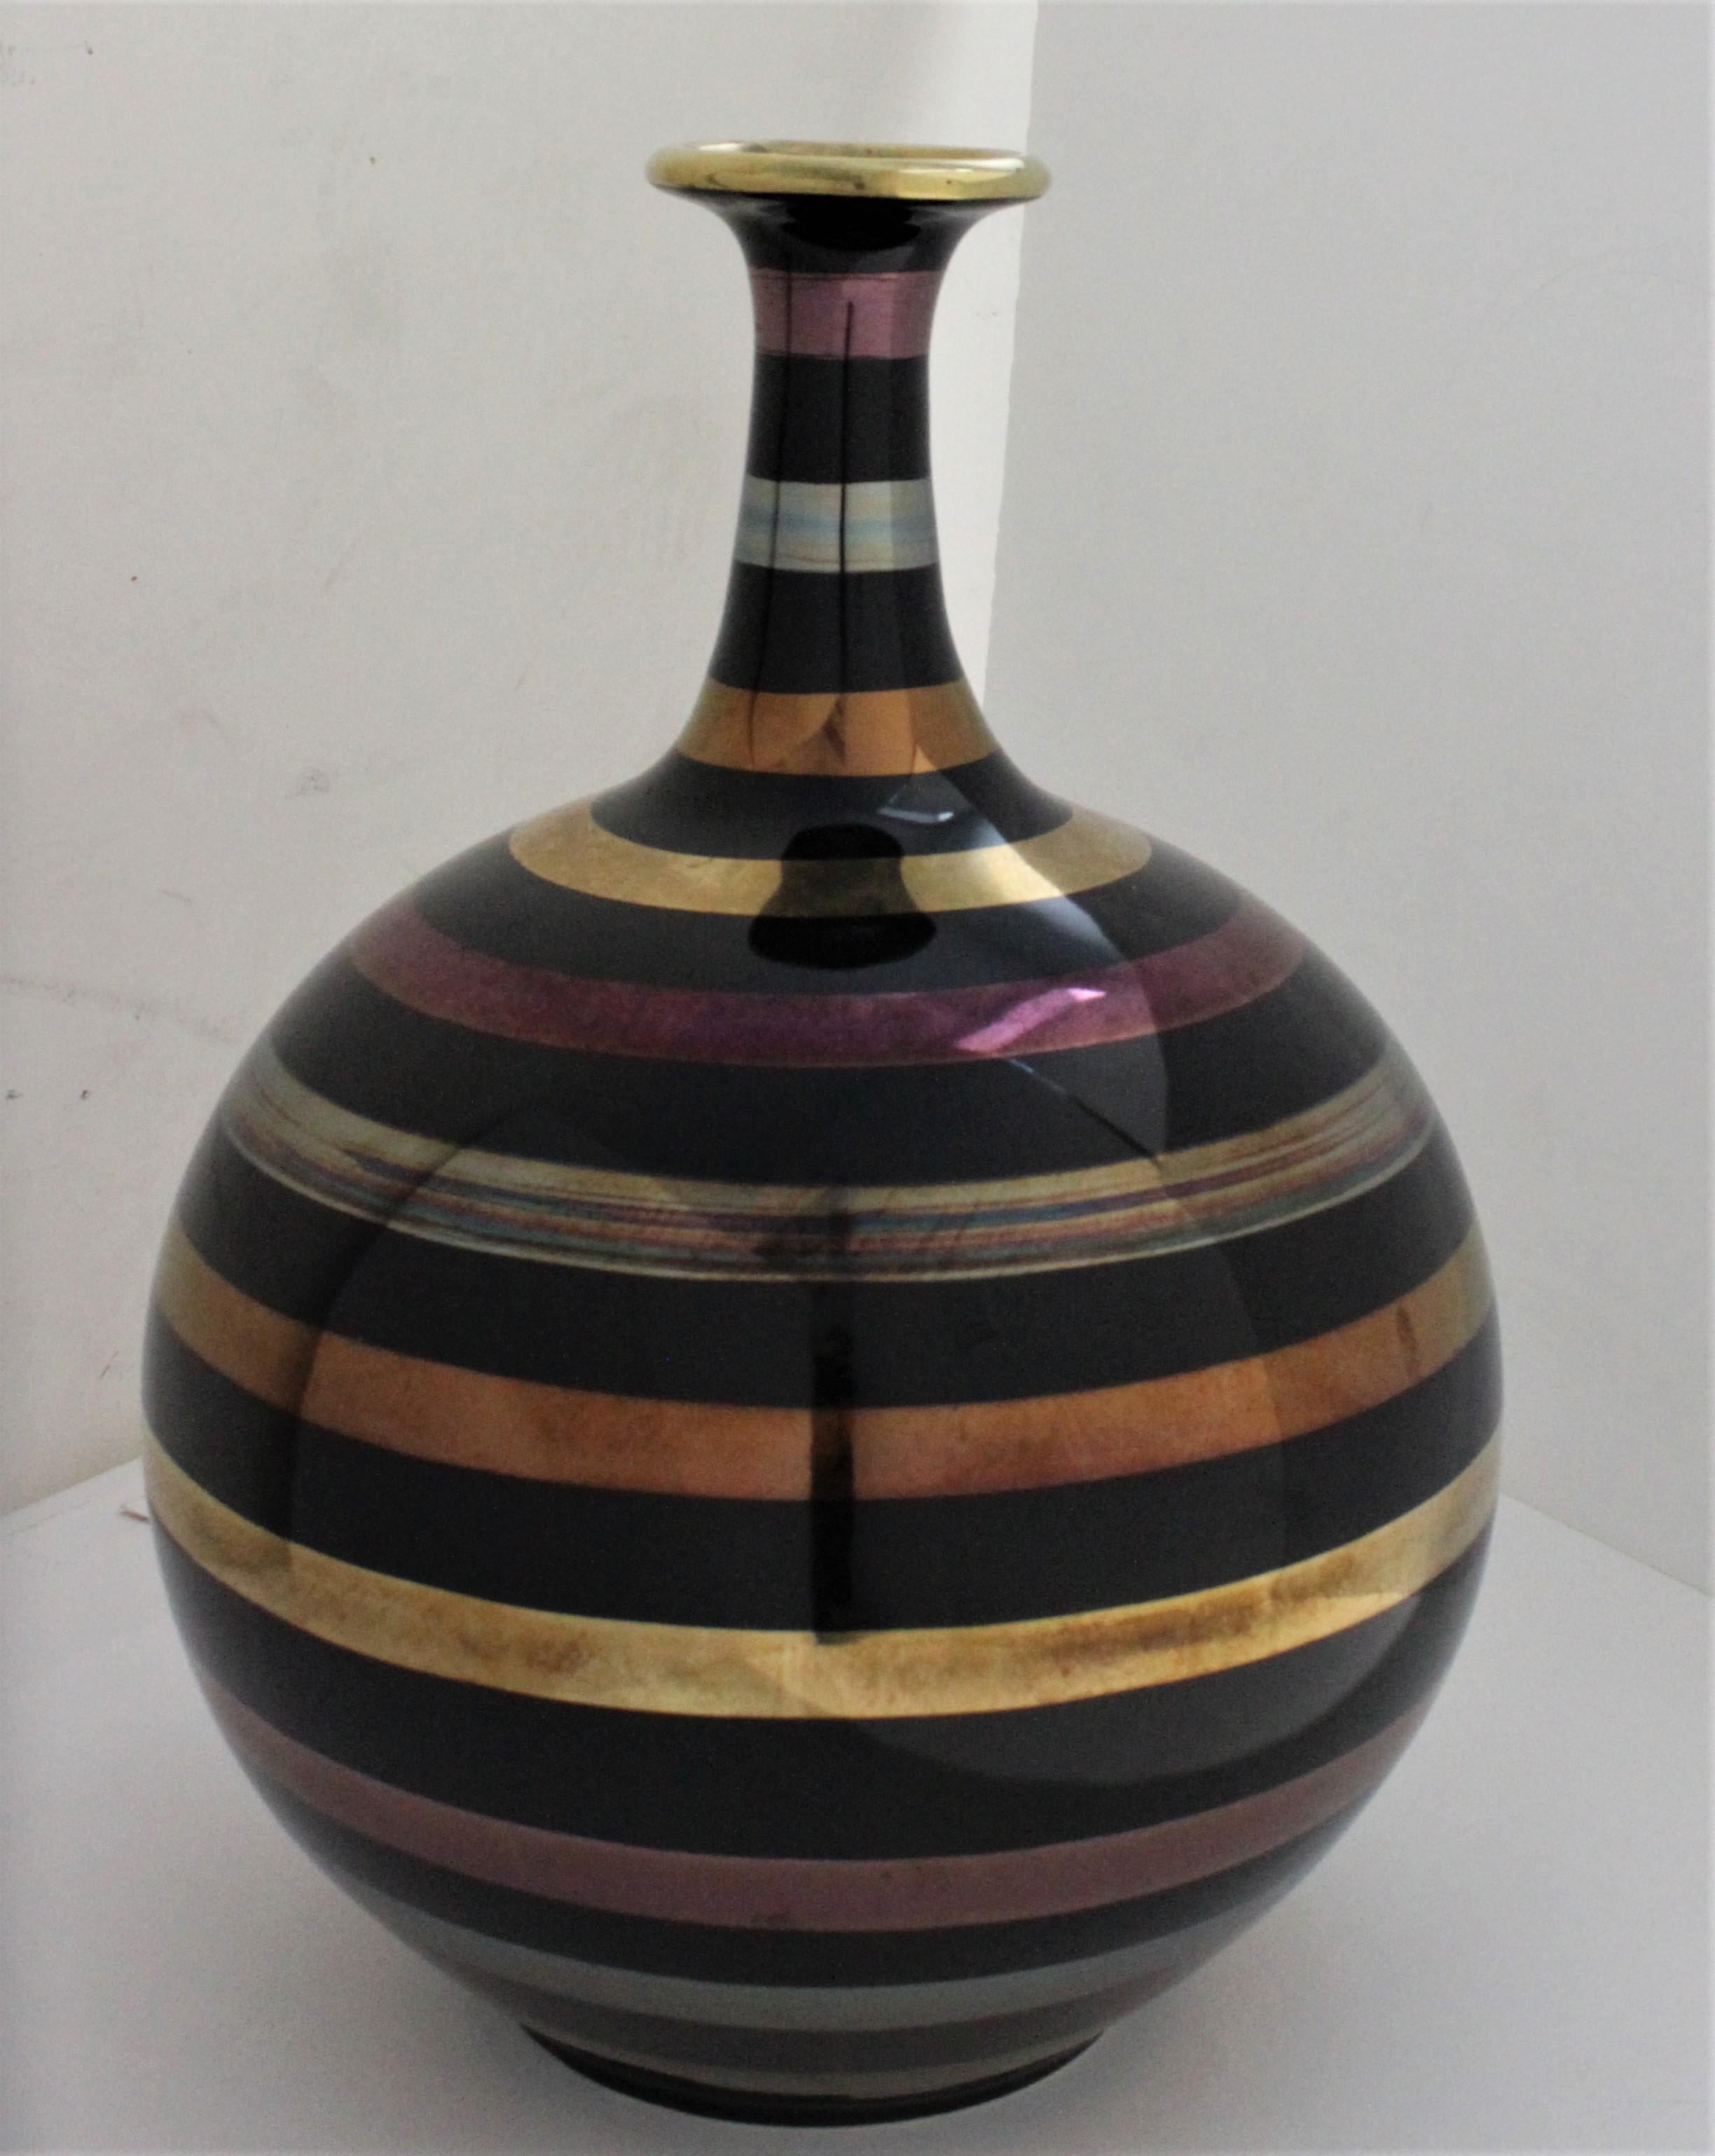 Glazed Ceramic Vase with Bands of 24k Gold, Silver and Copper In Good Condition For Sale In West Palm Beach, FL